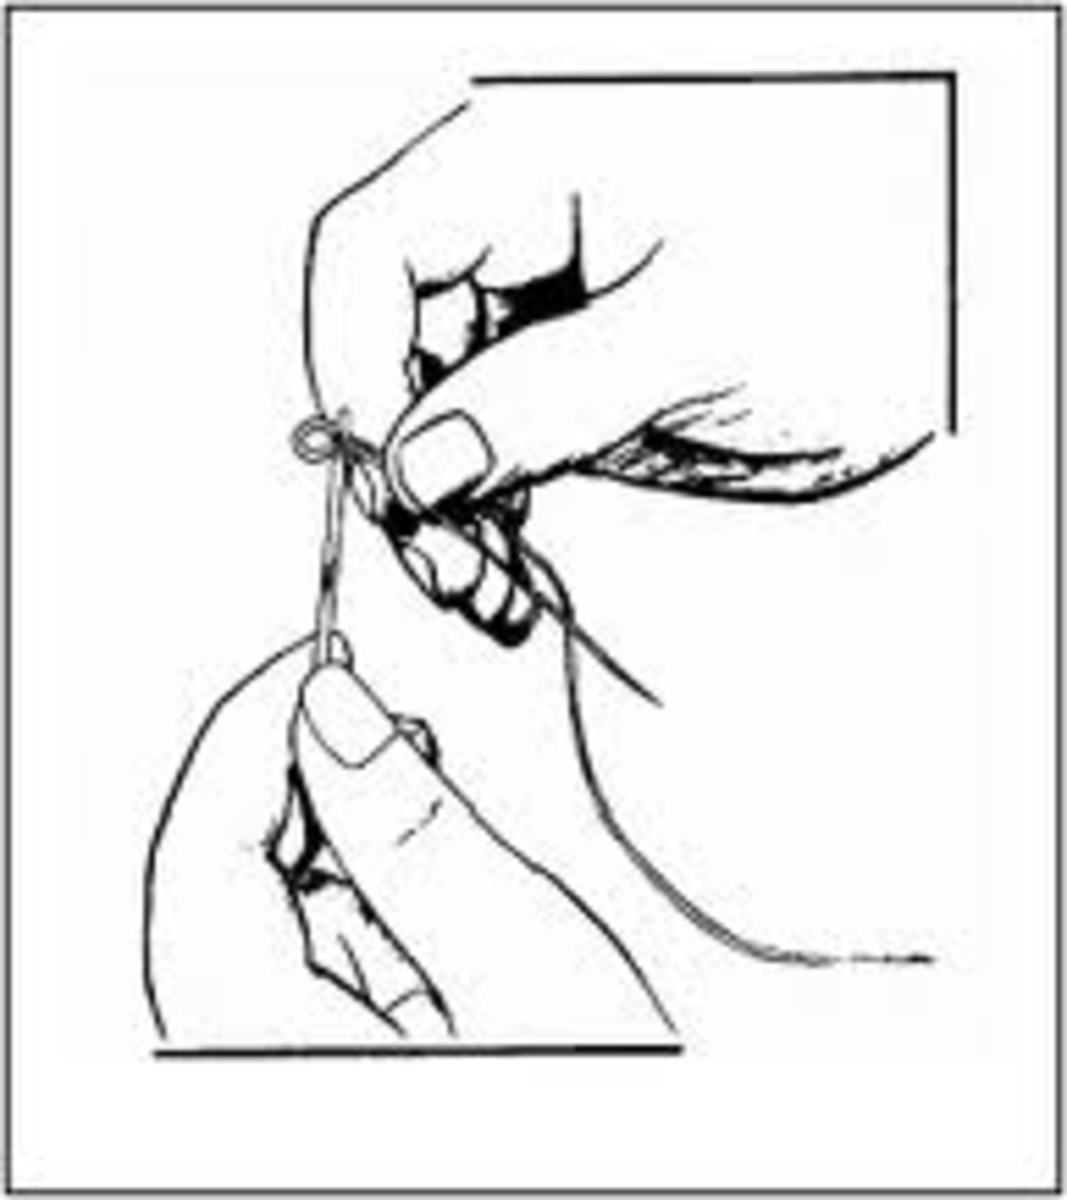 hand-sewing-needles-an-illustrated-guide-to-the-types-and-uses-of-hand-sewing-needles